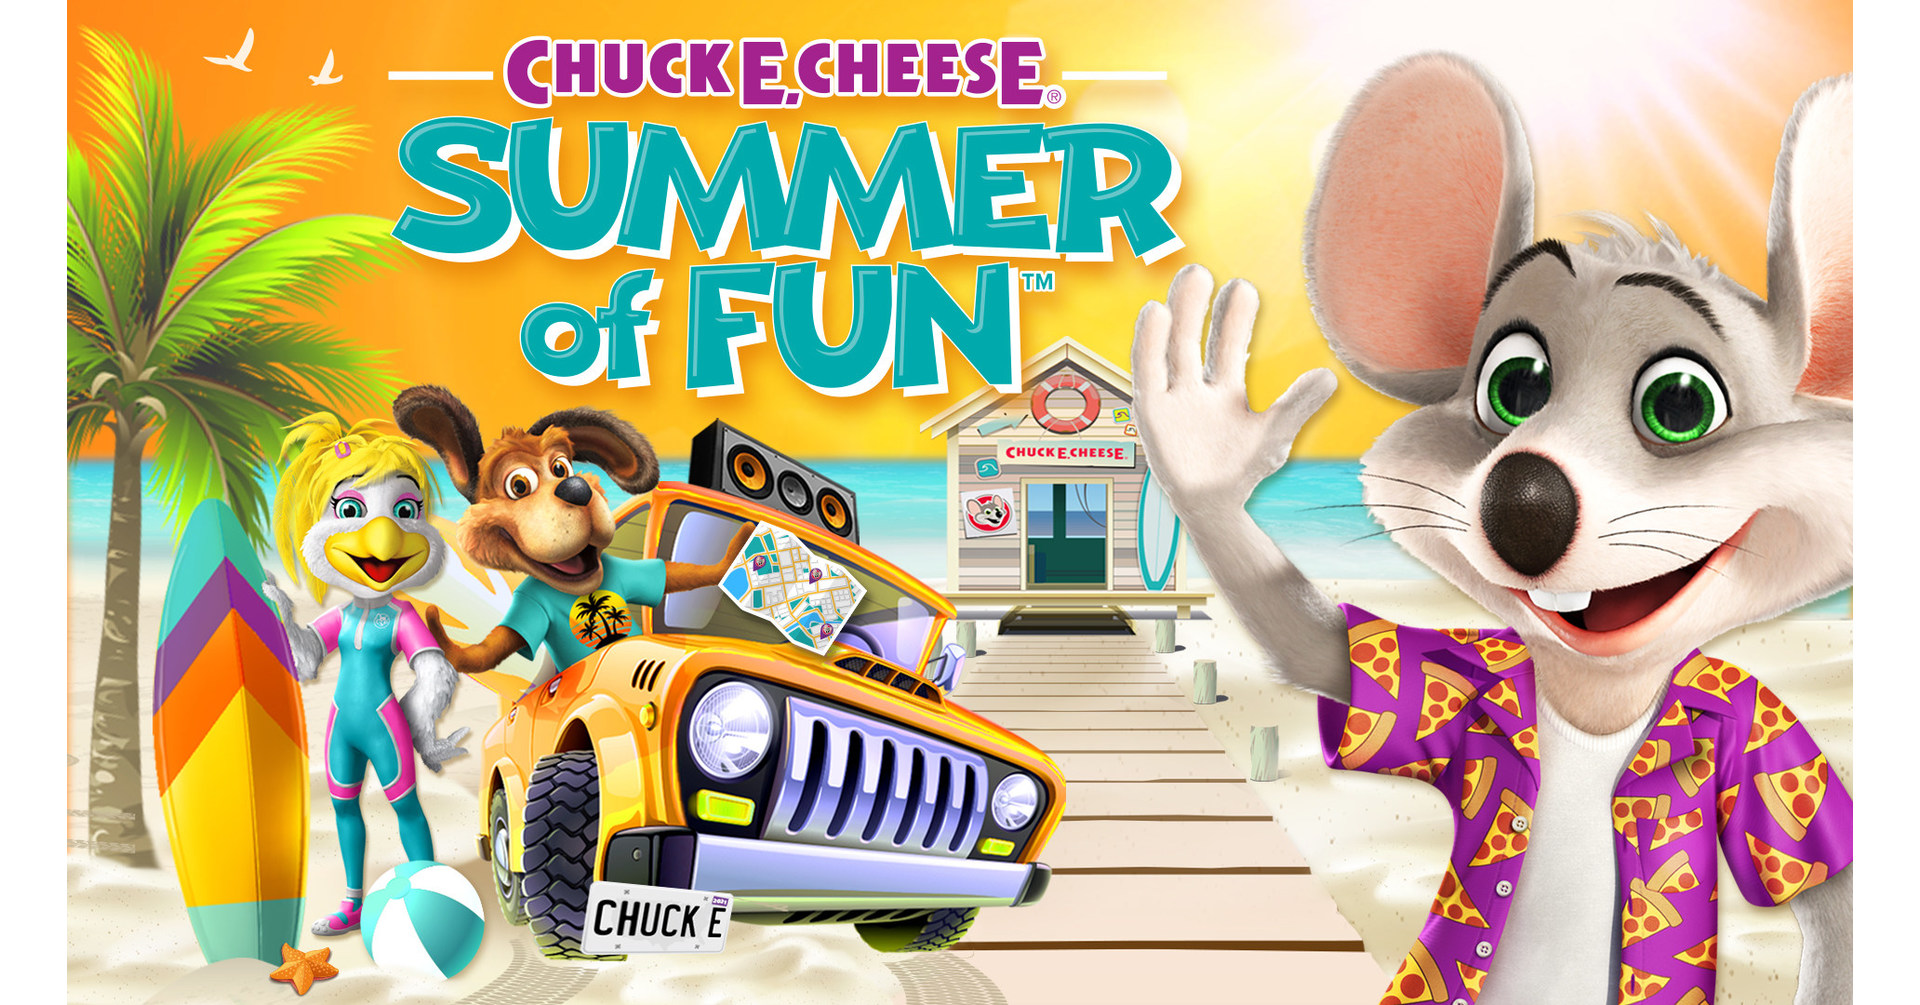 "STAYCATION = PLAYCATION" CHUCK E. CHEESE INTRODUCES BEST VALUE WITH